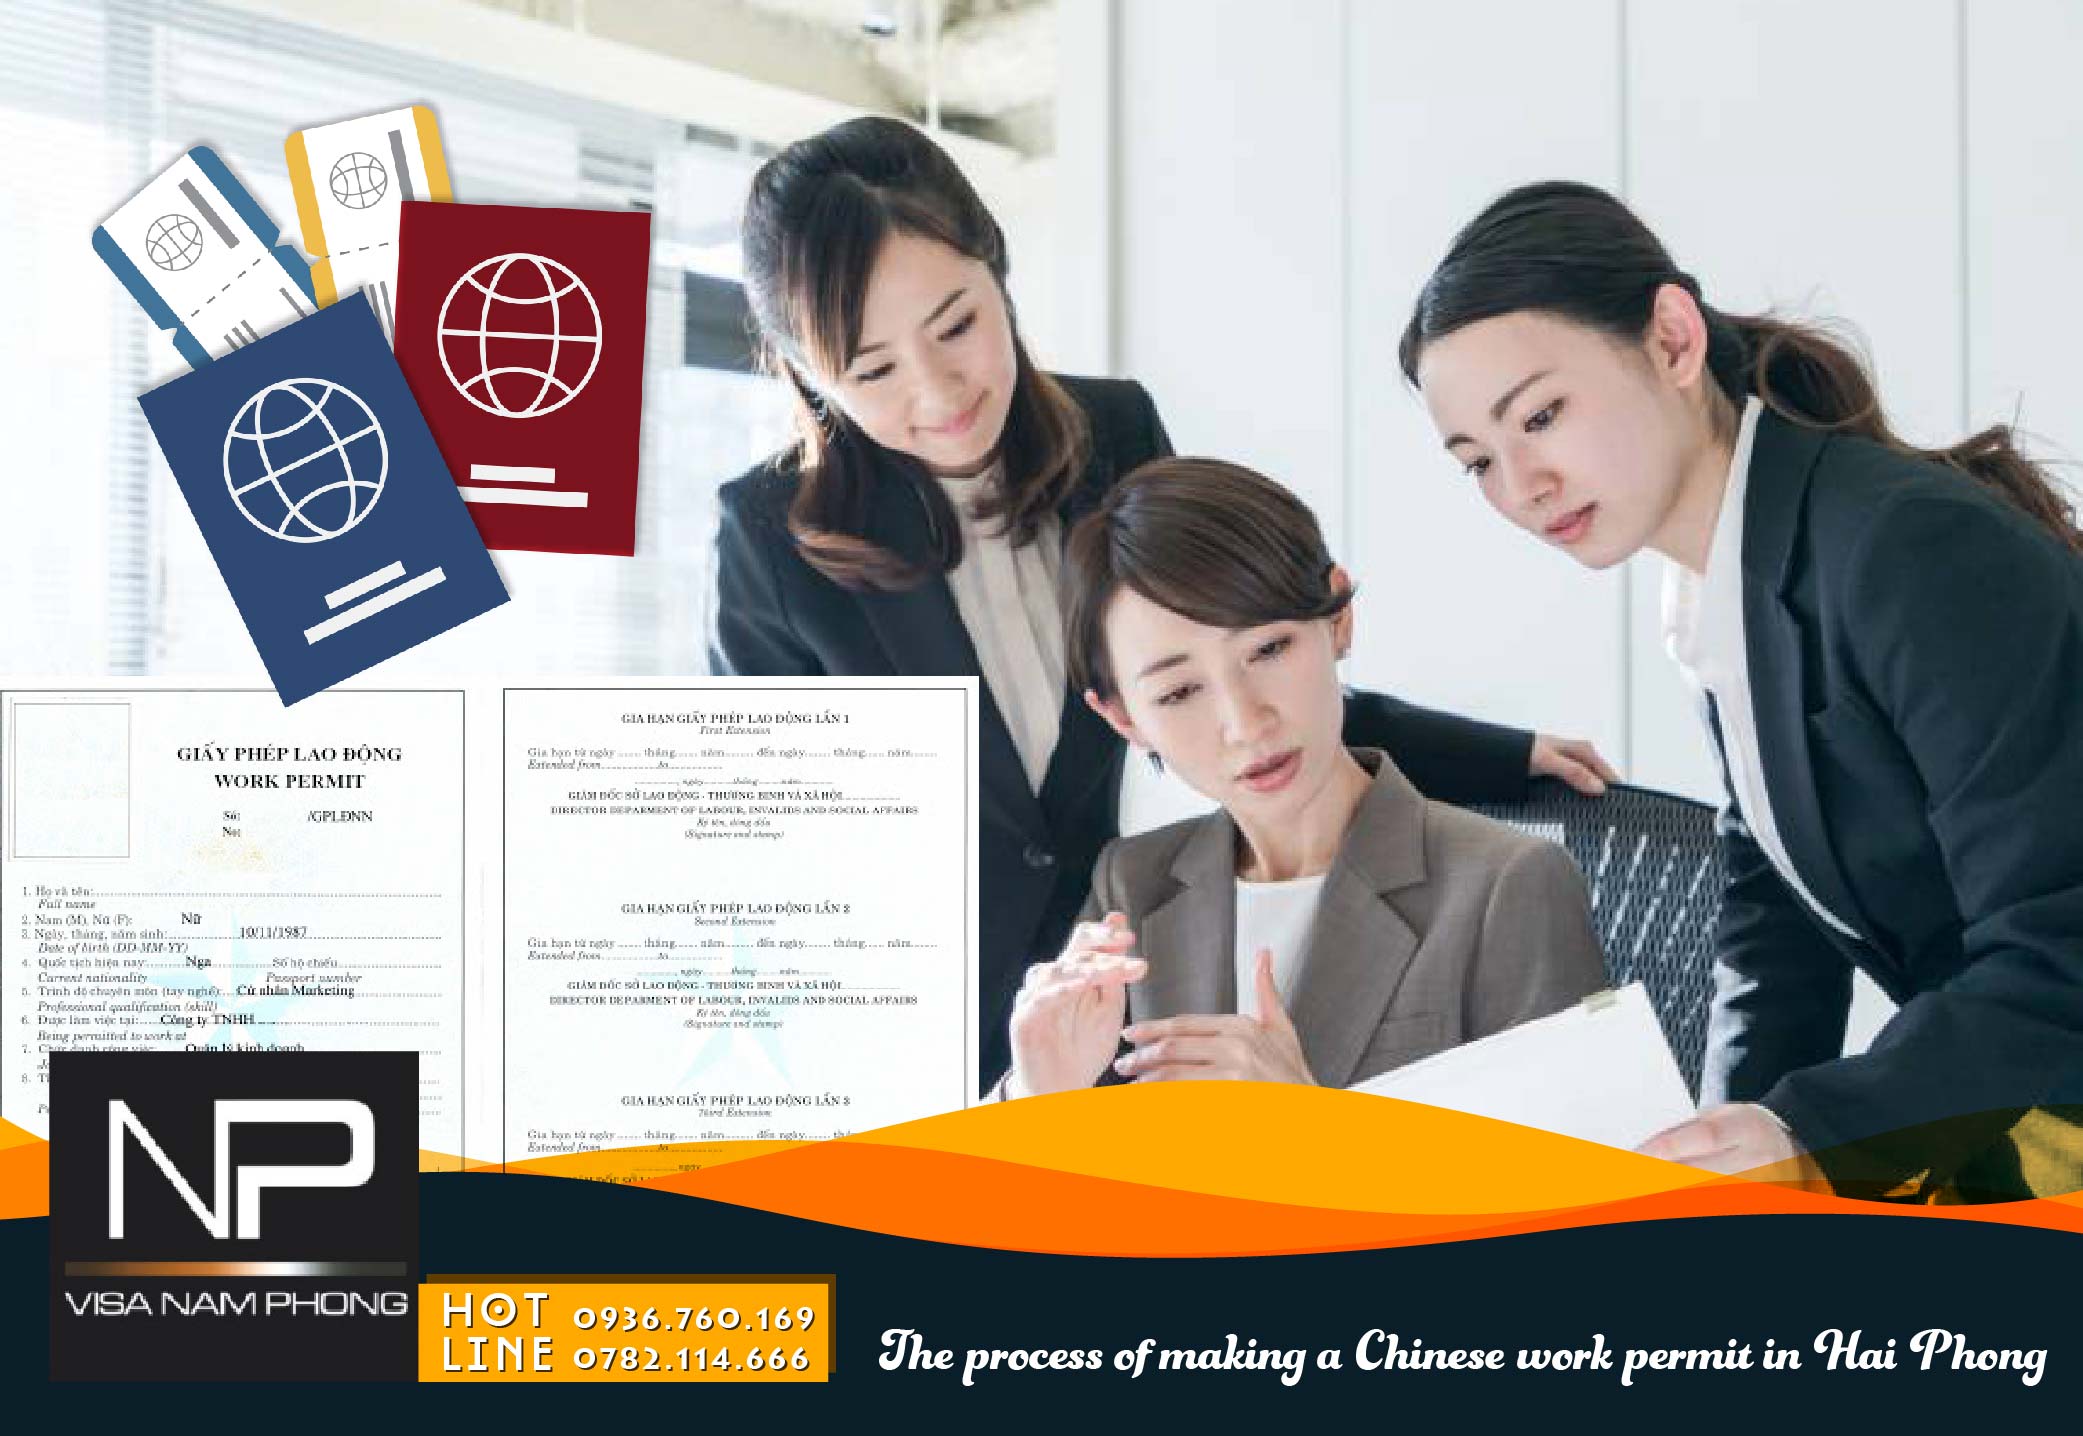 The process of making a Chinese work permit in Hai Phong